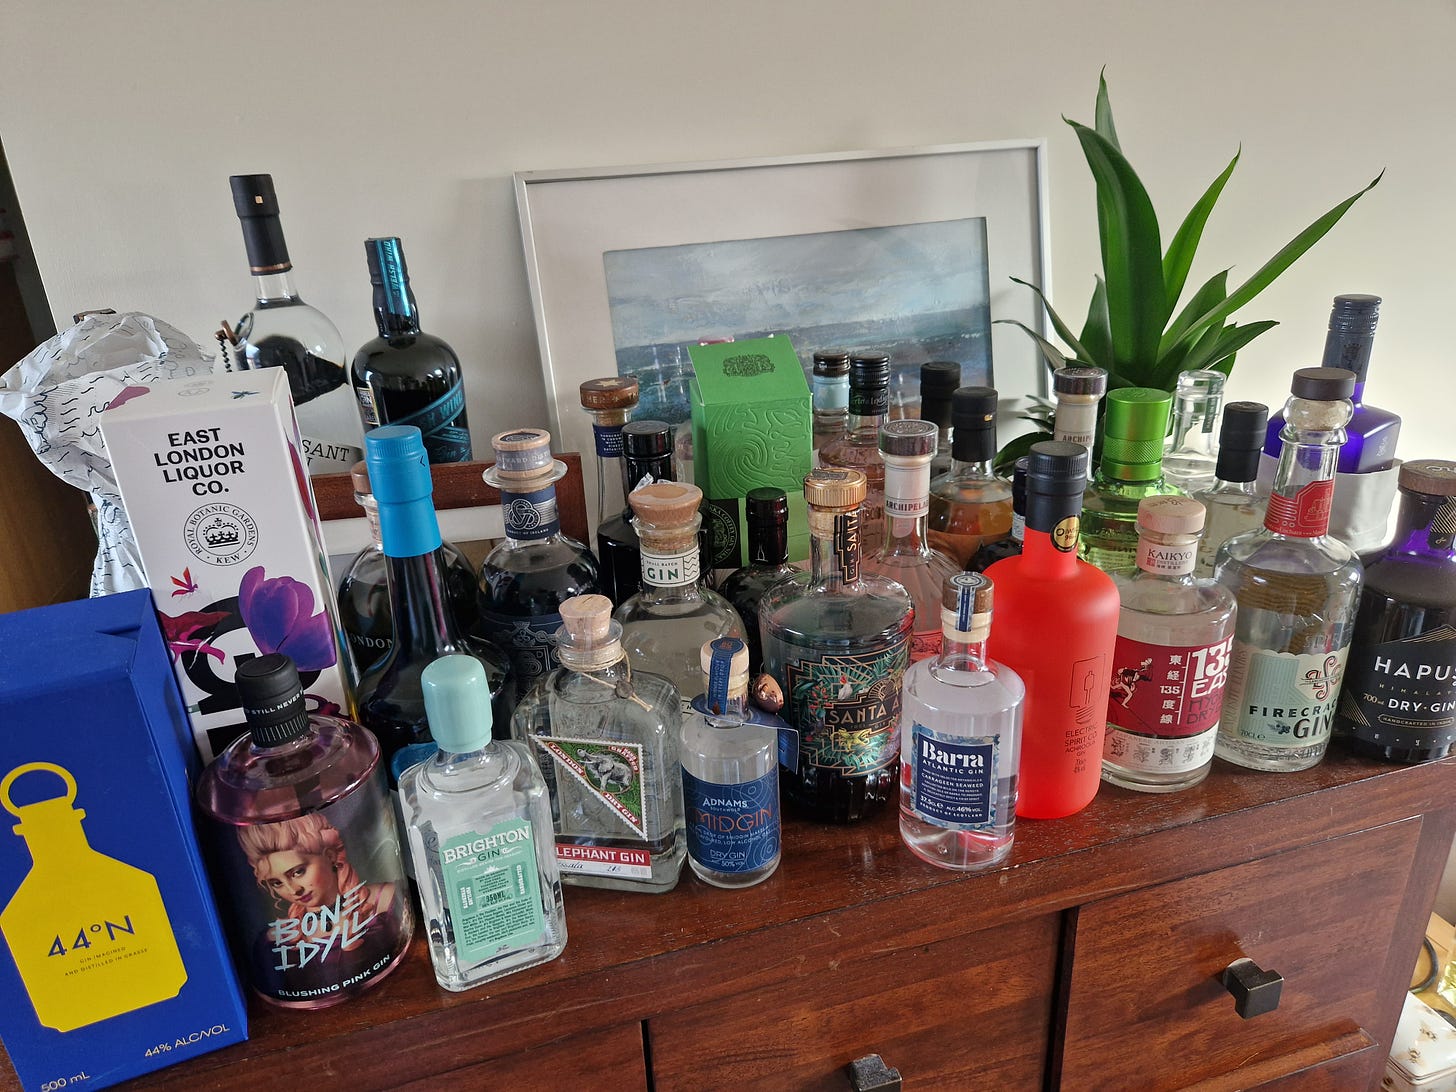 30 bottles of gin squeezed together on top of a chest of drawers. A painting and a pot plant are just visible behind all the booze. There's a lot of booze.